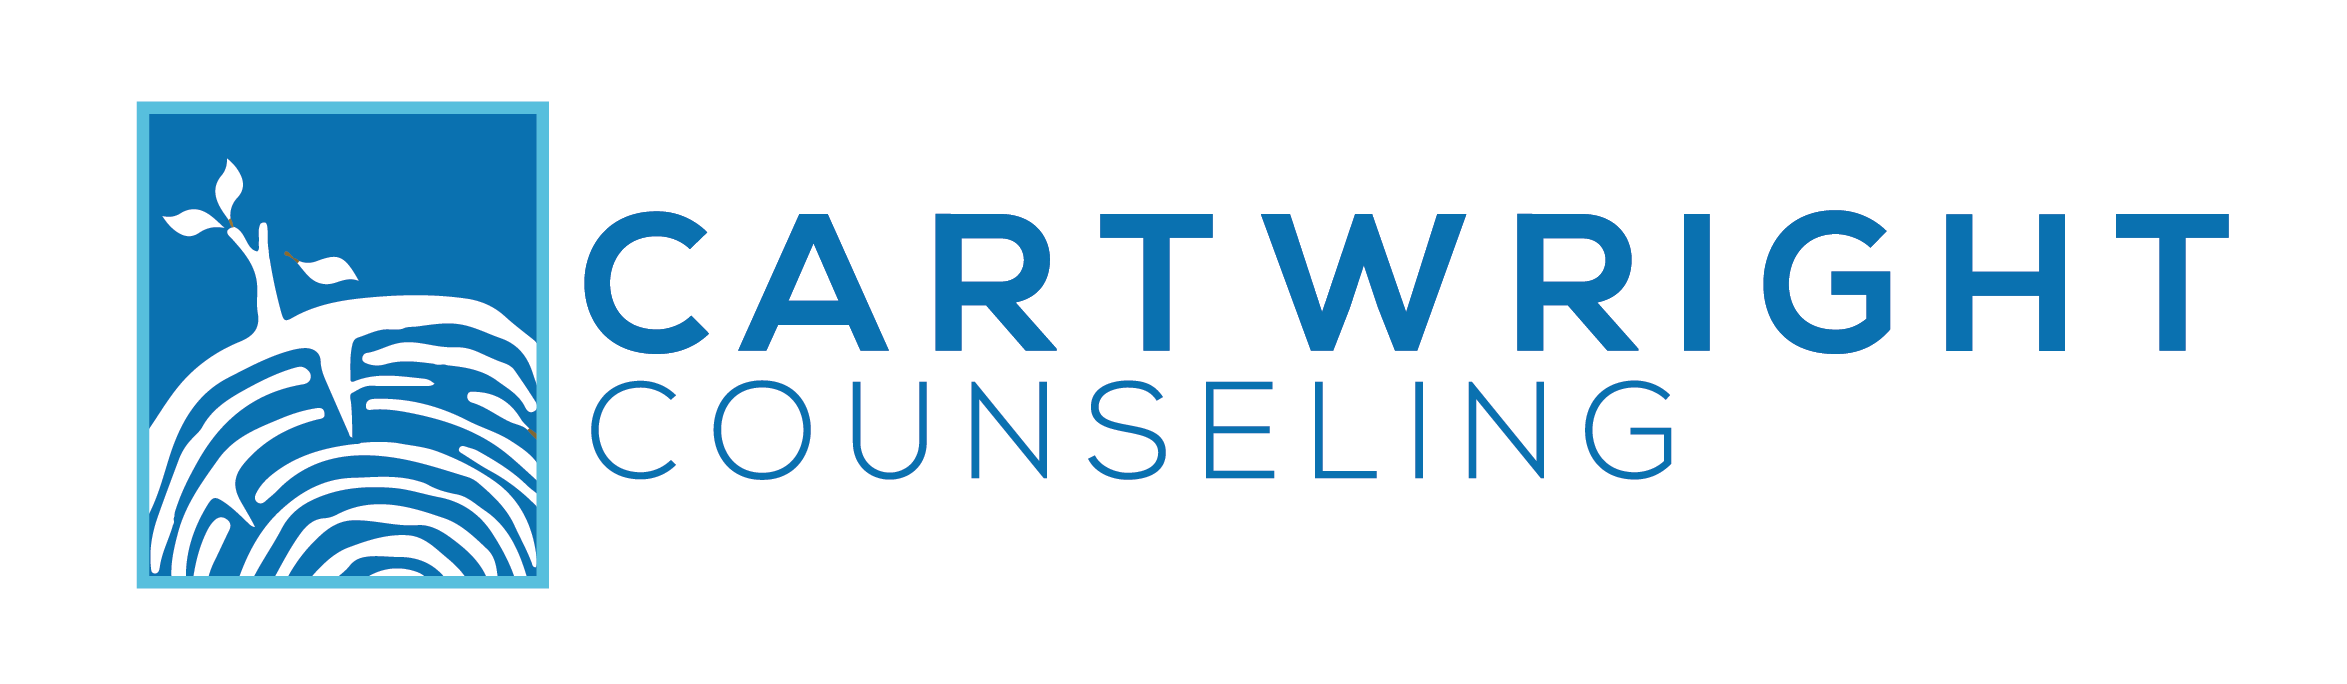 Cartwright Counseling logo | Therapy for Teens & Parents | Noblesville, IN